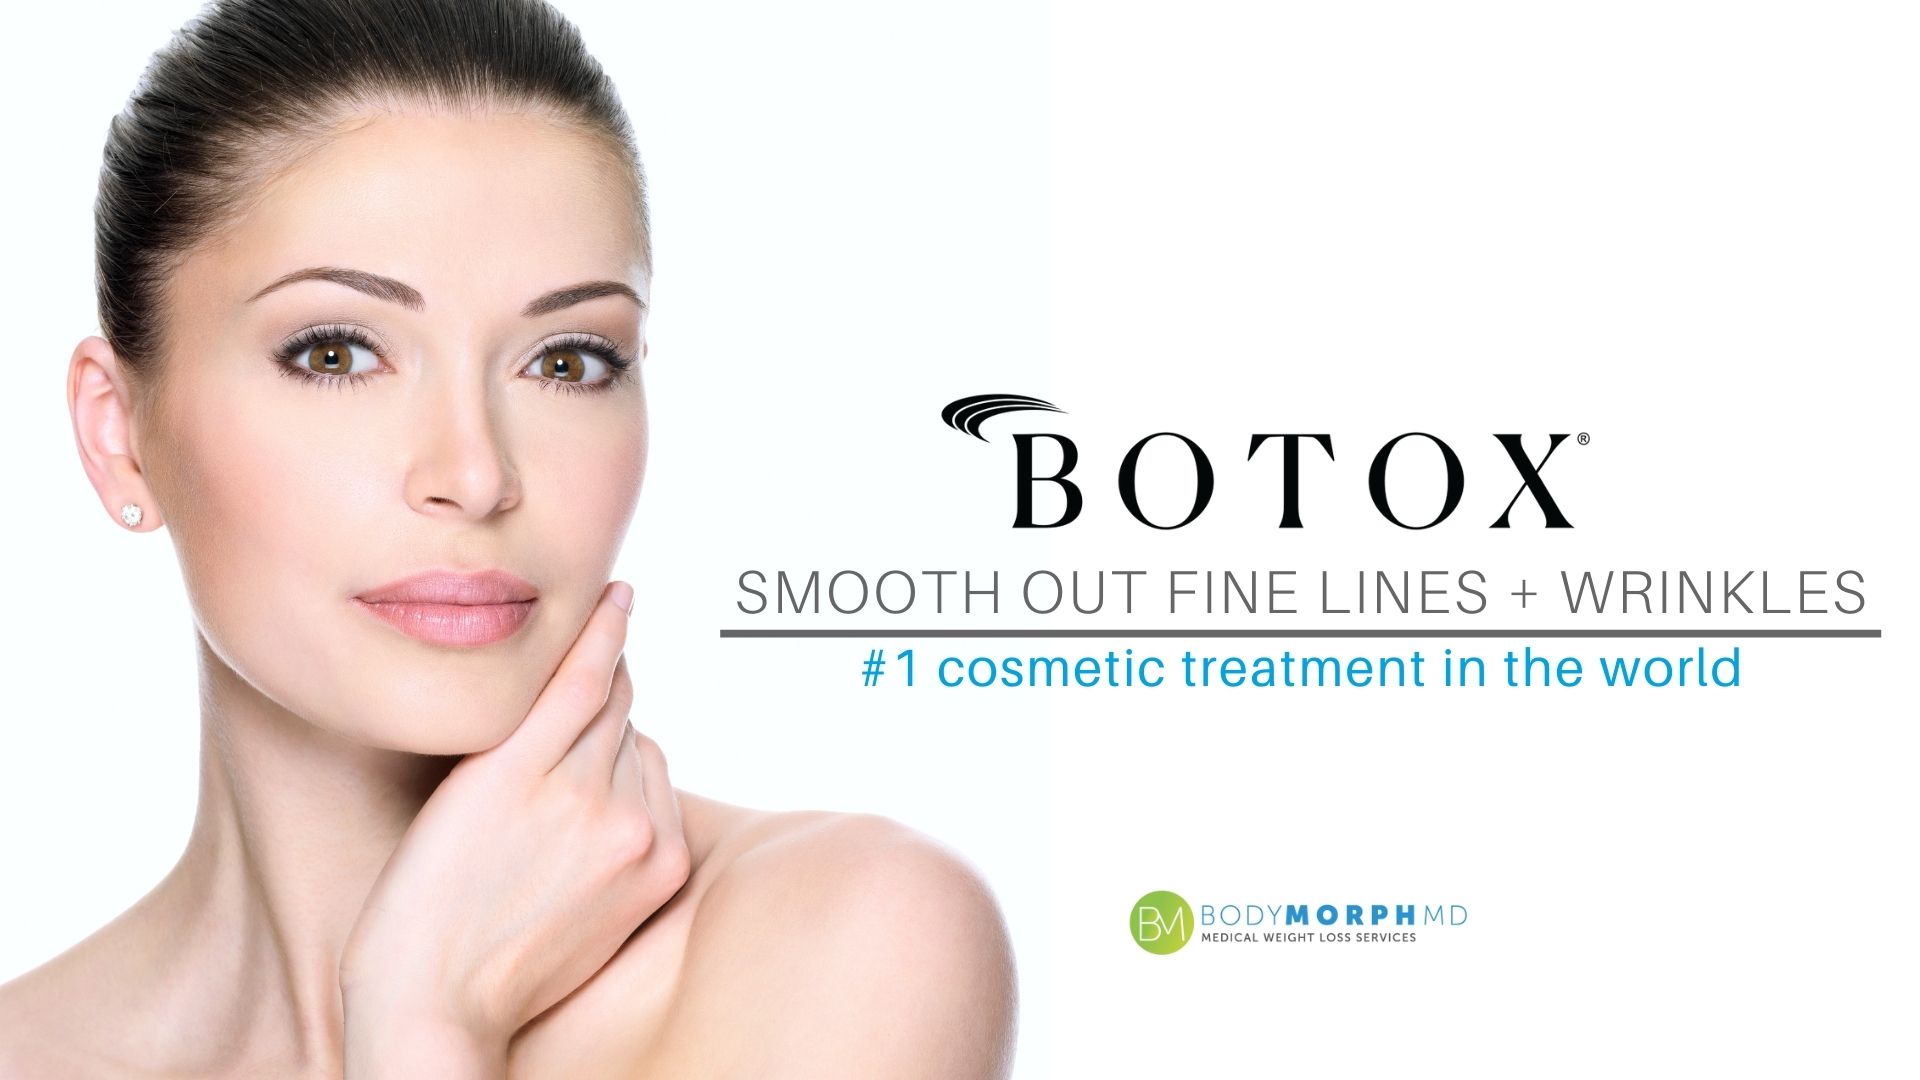 woman with rejuvenated appearance after botox treatment